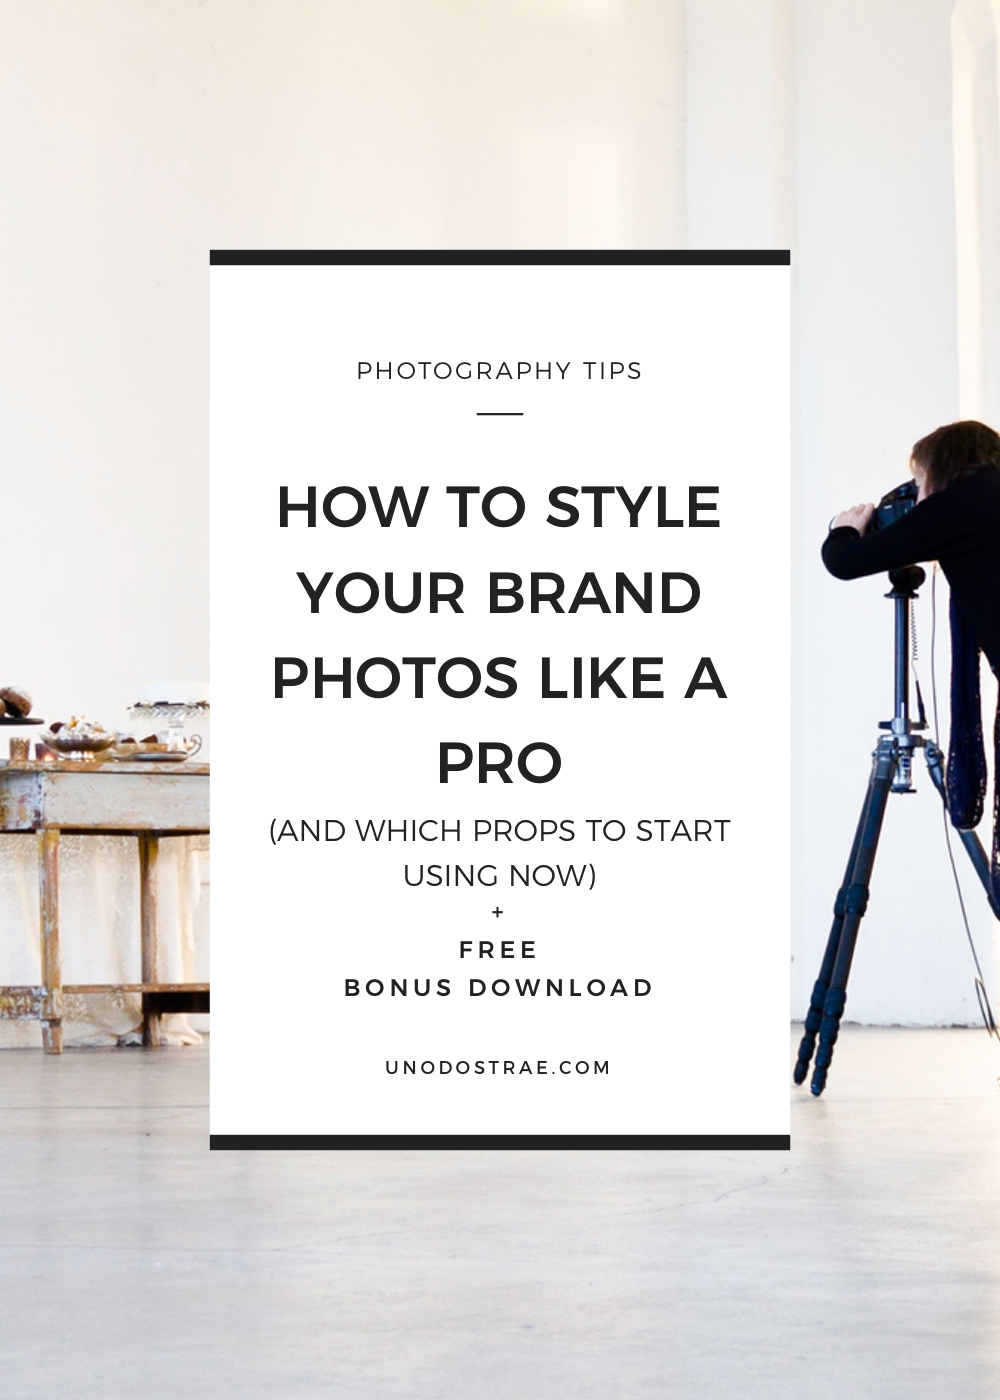 How to style your brand photos like a master prop stylist (+ free download props tracker) - unodostrae.com